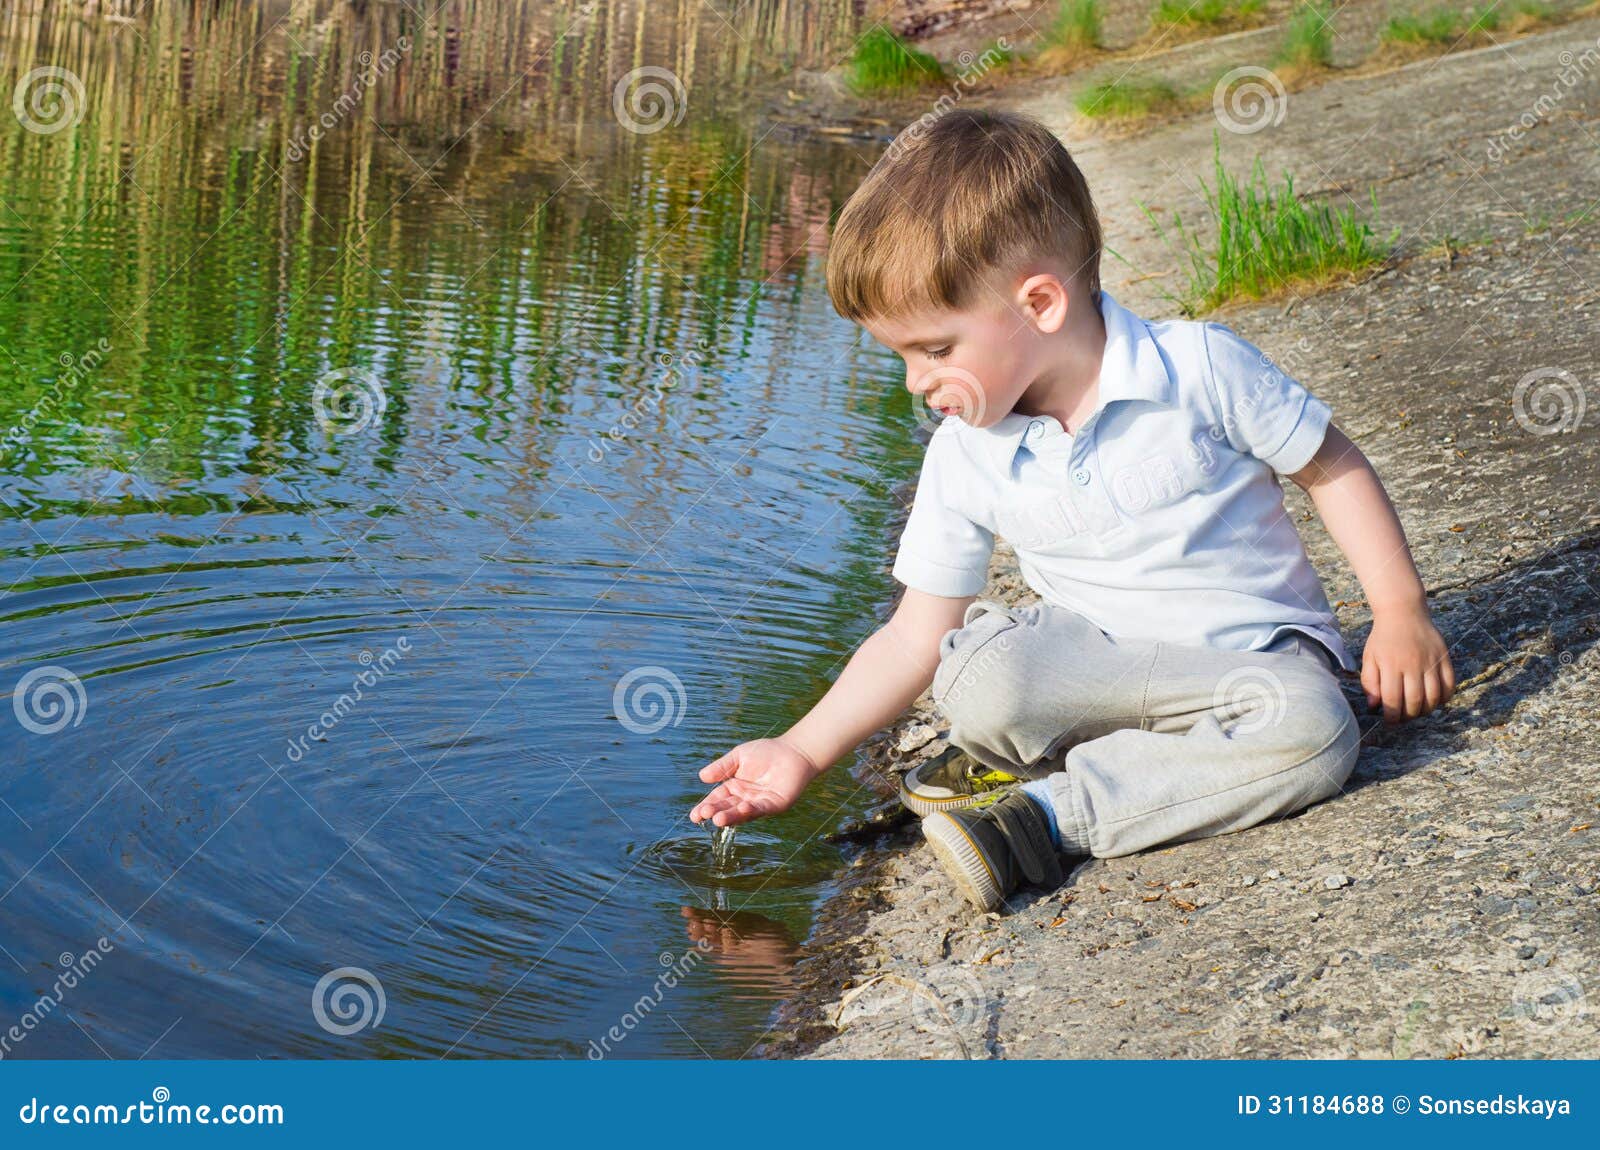 beautiful boy pours water from the palm